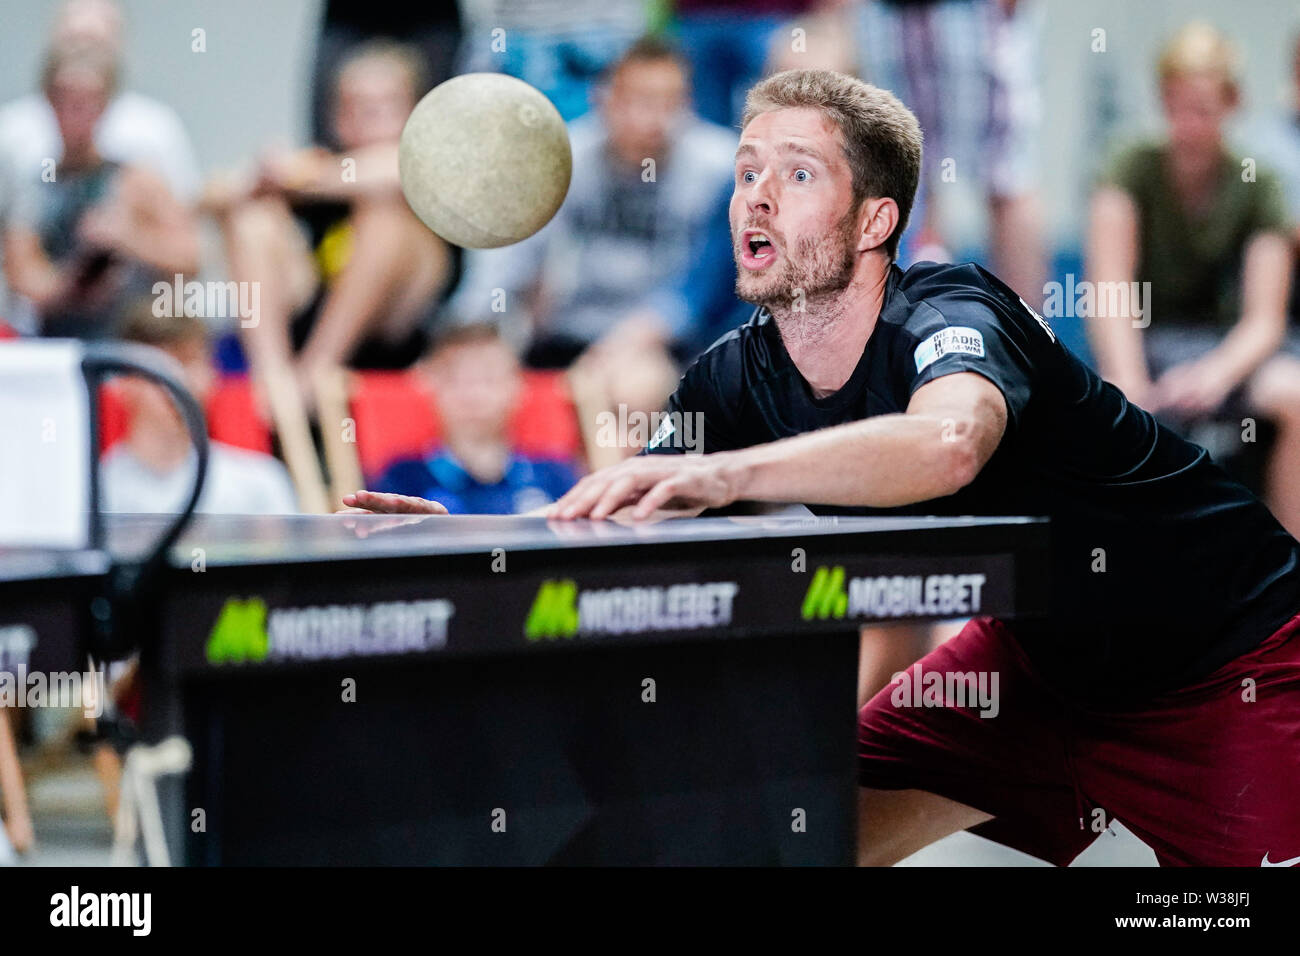 Kaiserslautern, Germany. 13th July, 2019. Cornelius Döll plays against a  team-mate in the finals of the World Championship in the trend sport Headis.  The headball table tennis was developed in 2006 in